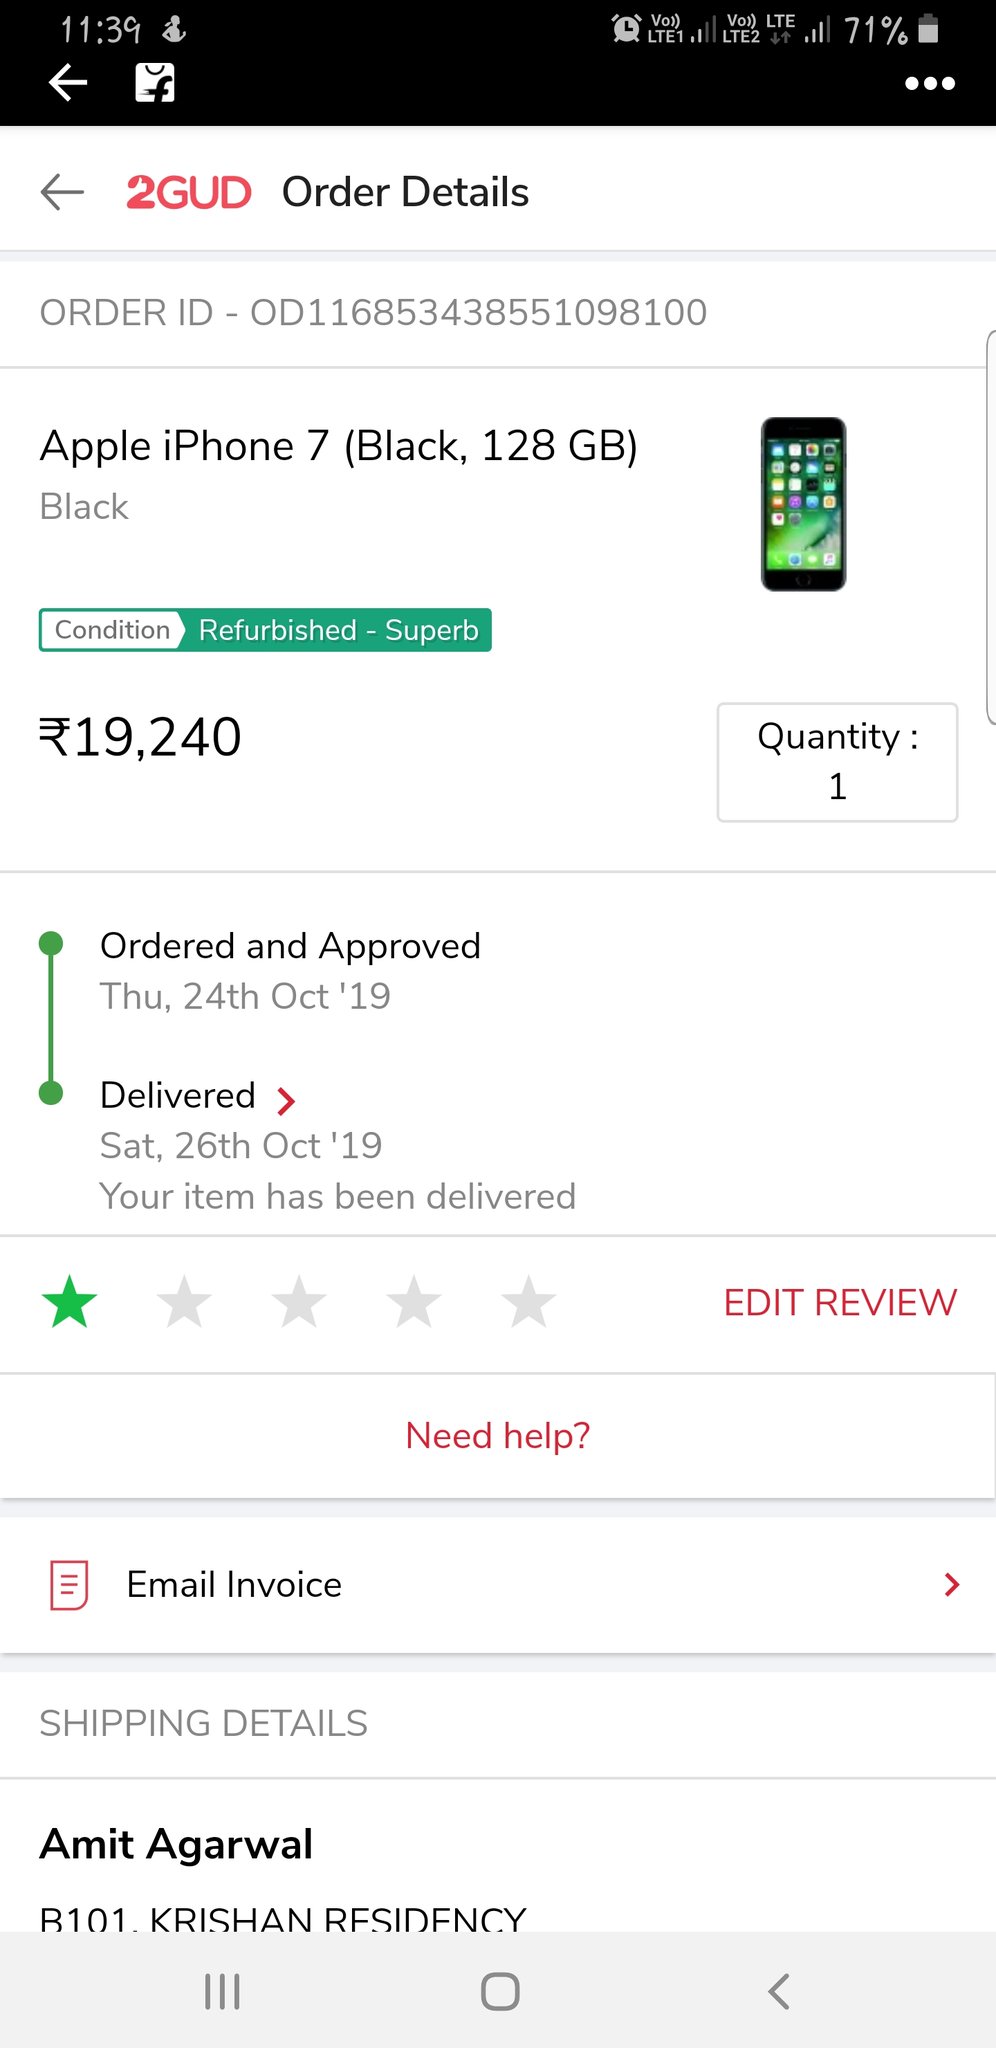 Amit Agarwal Flipkartsupport 2gud 2 Month Ago I Purchased Iphone 7 From 2gud Now The Phone Screen Come Out Its On And Its Fully Charged Battry Sometime Shows 0 And